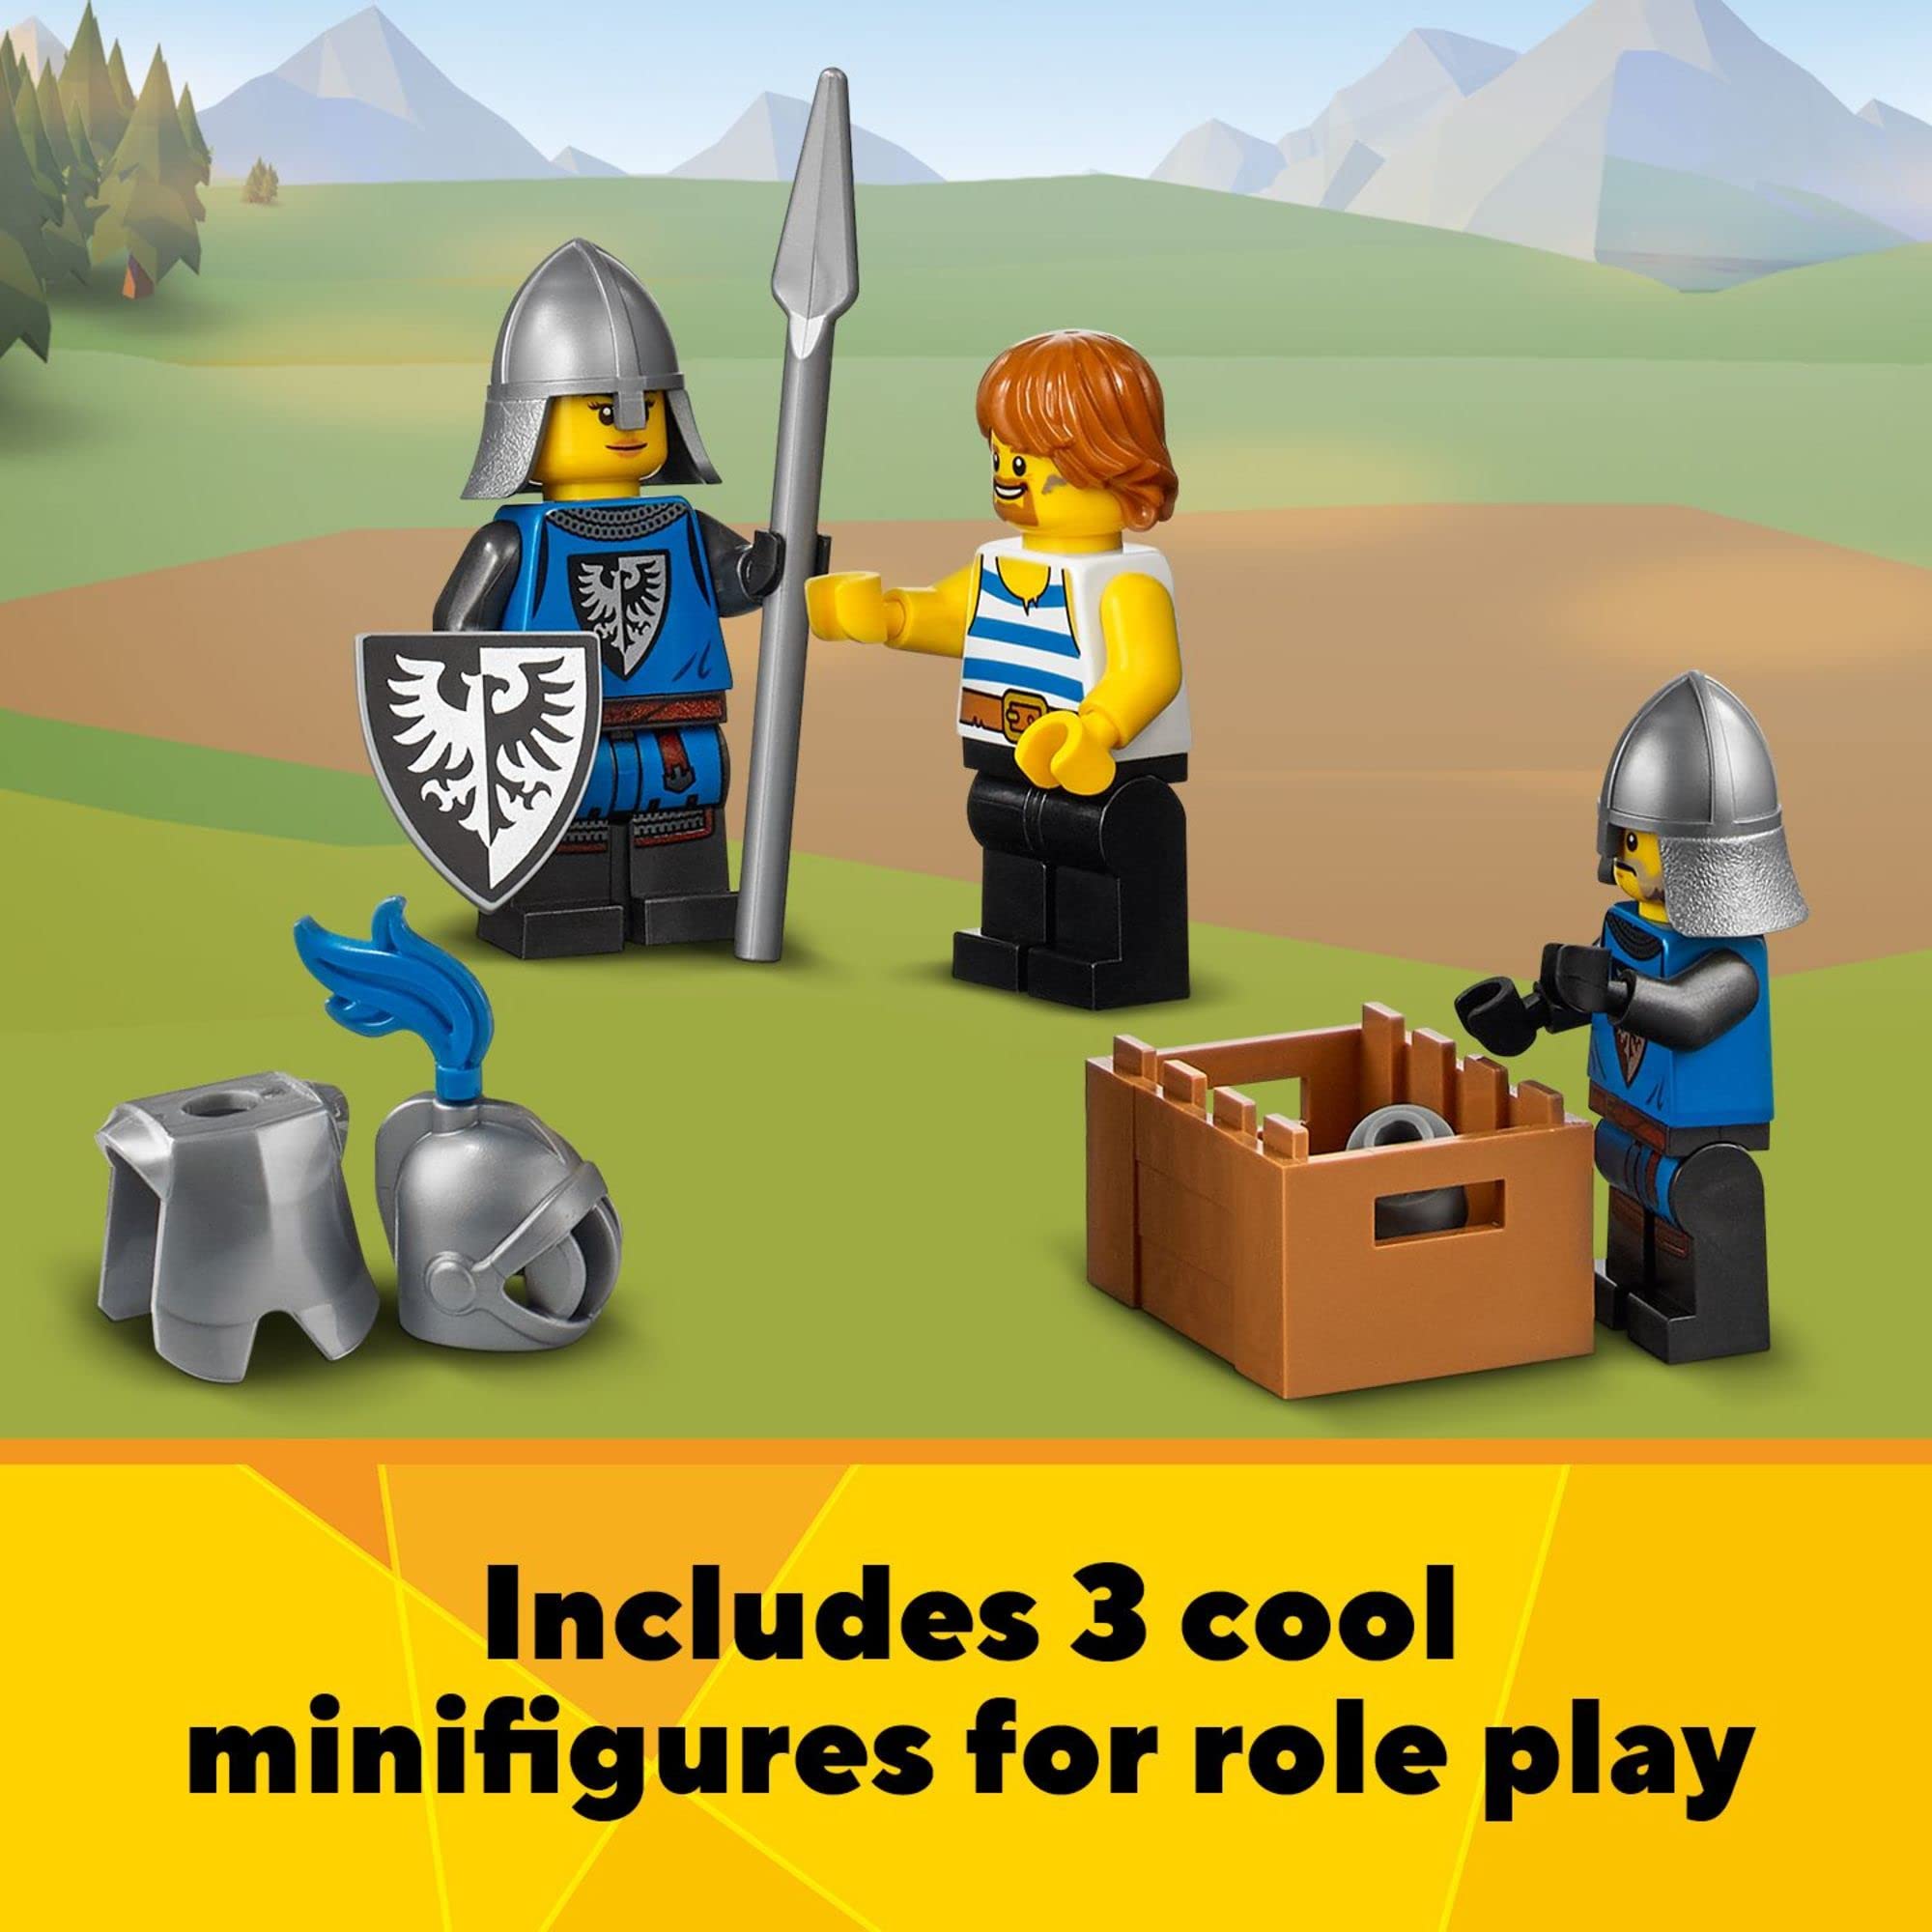 LEGO Creator 3in1 Medieval Castle Toy to Tower or Marketplace 31120, with Skeleton, Dragon Figure, 3 Minifigures and Catapult